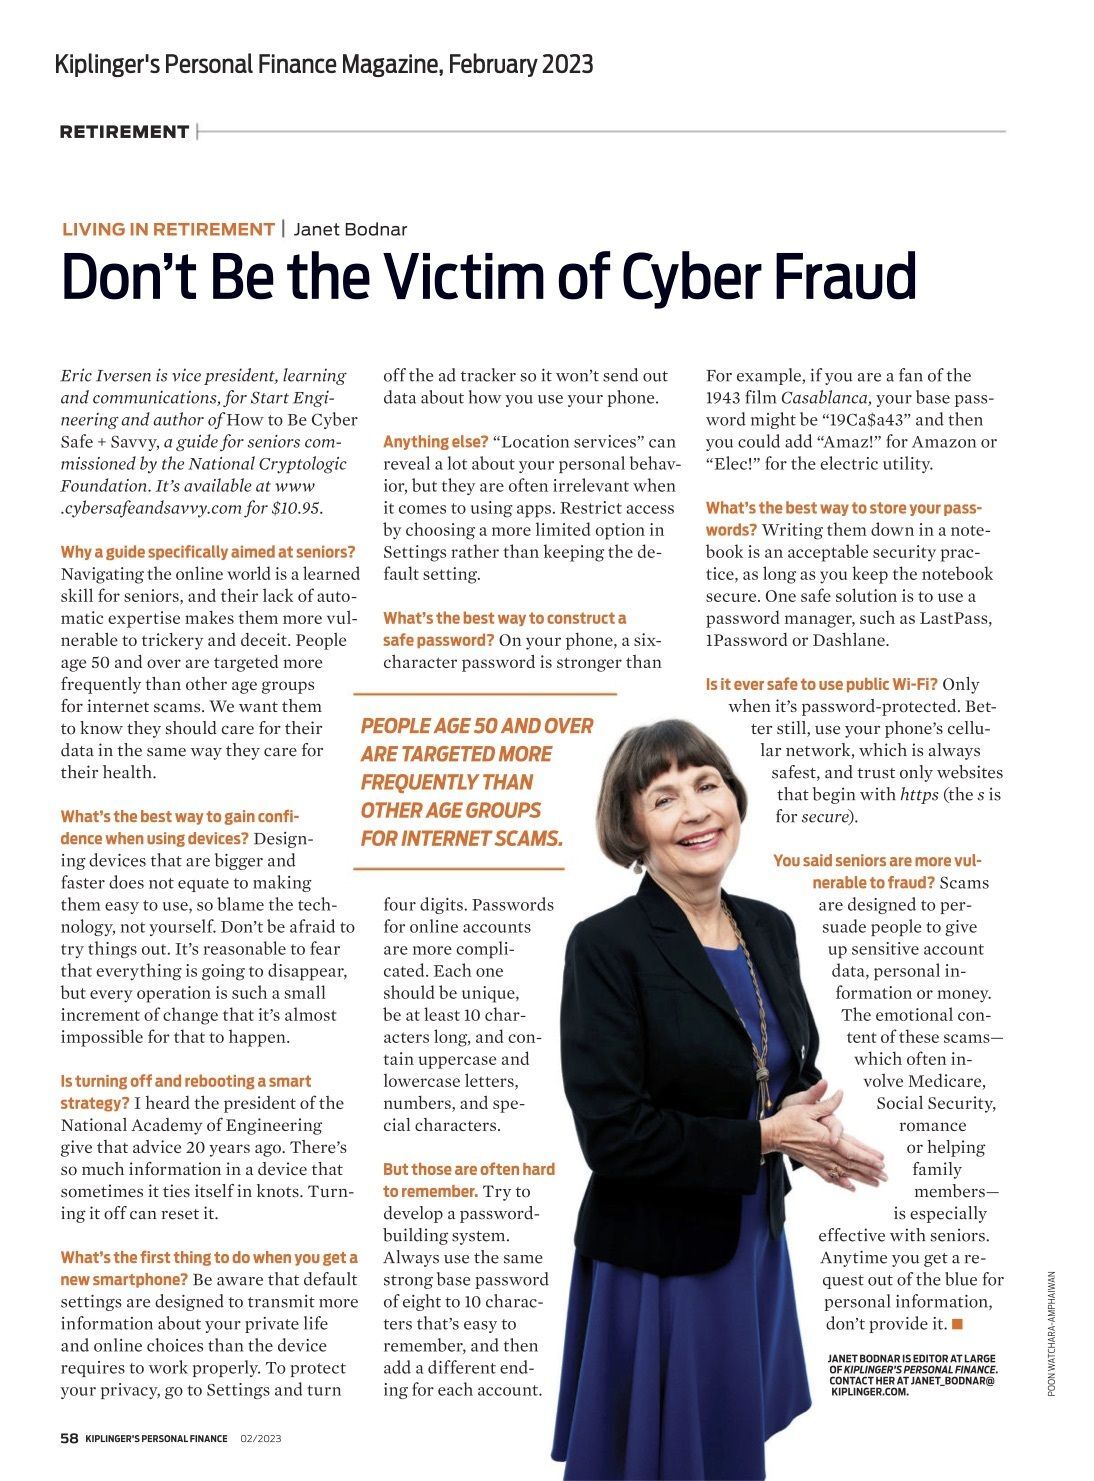 Kiplinger's article about How to be Cyber Safe & Savvy Booklet